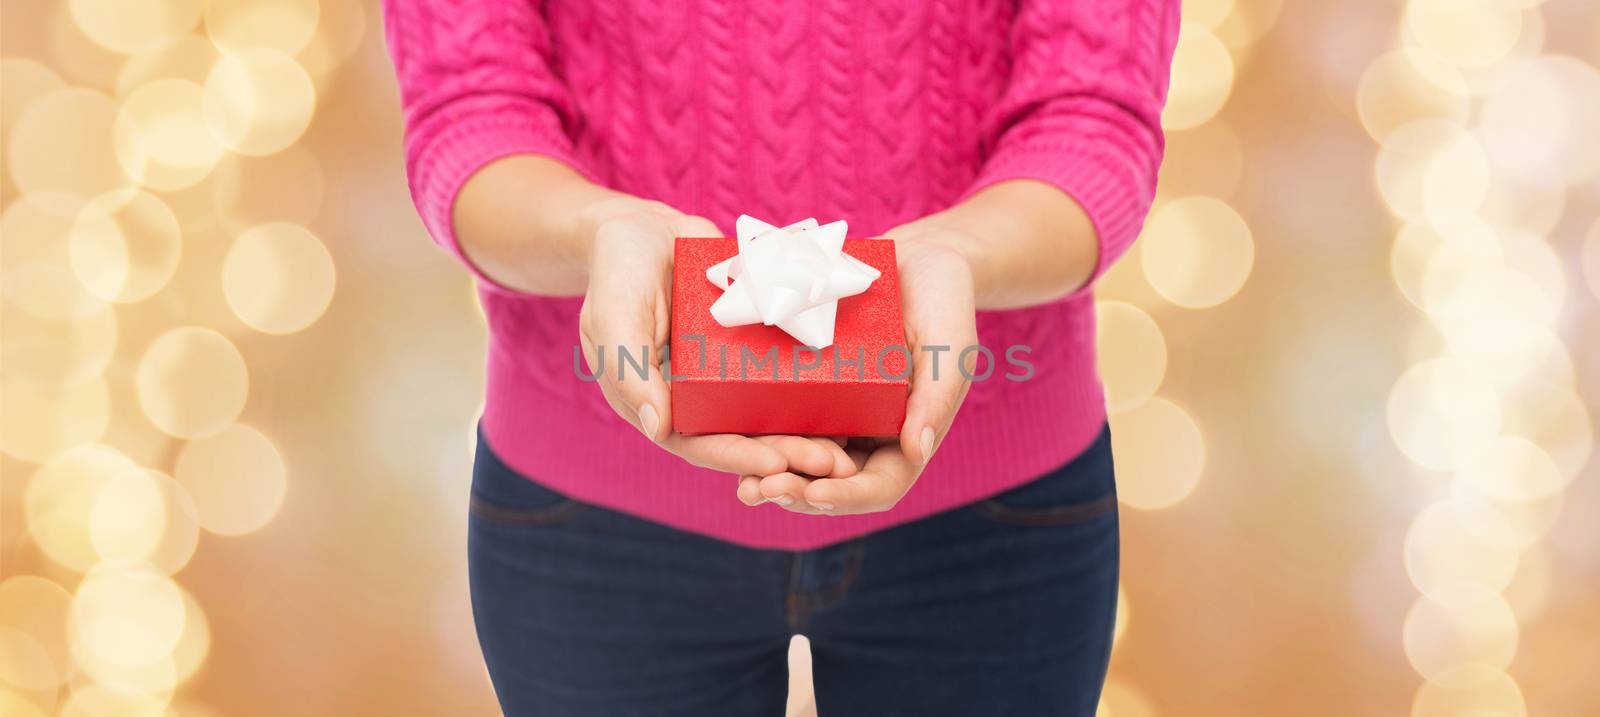 christmas, holidays and people concept - close up of woman in pink sweater holding gift box over beige lights background